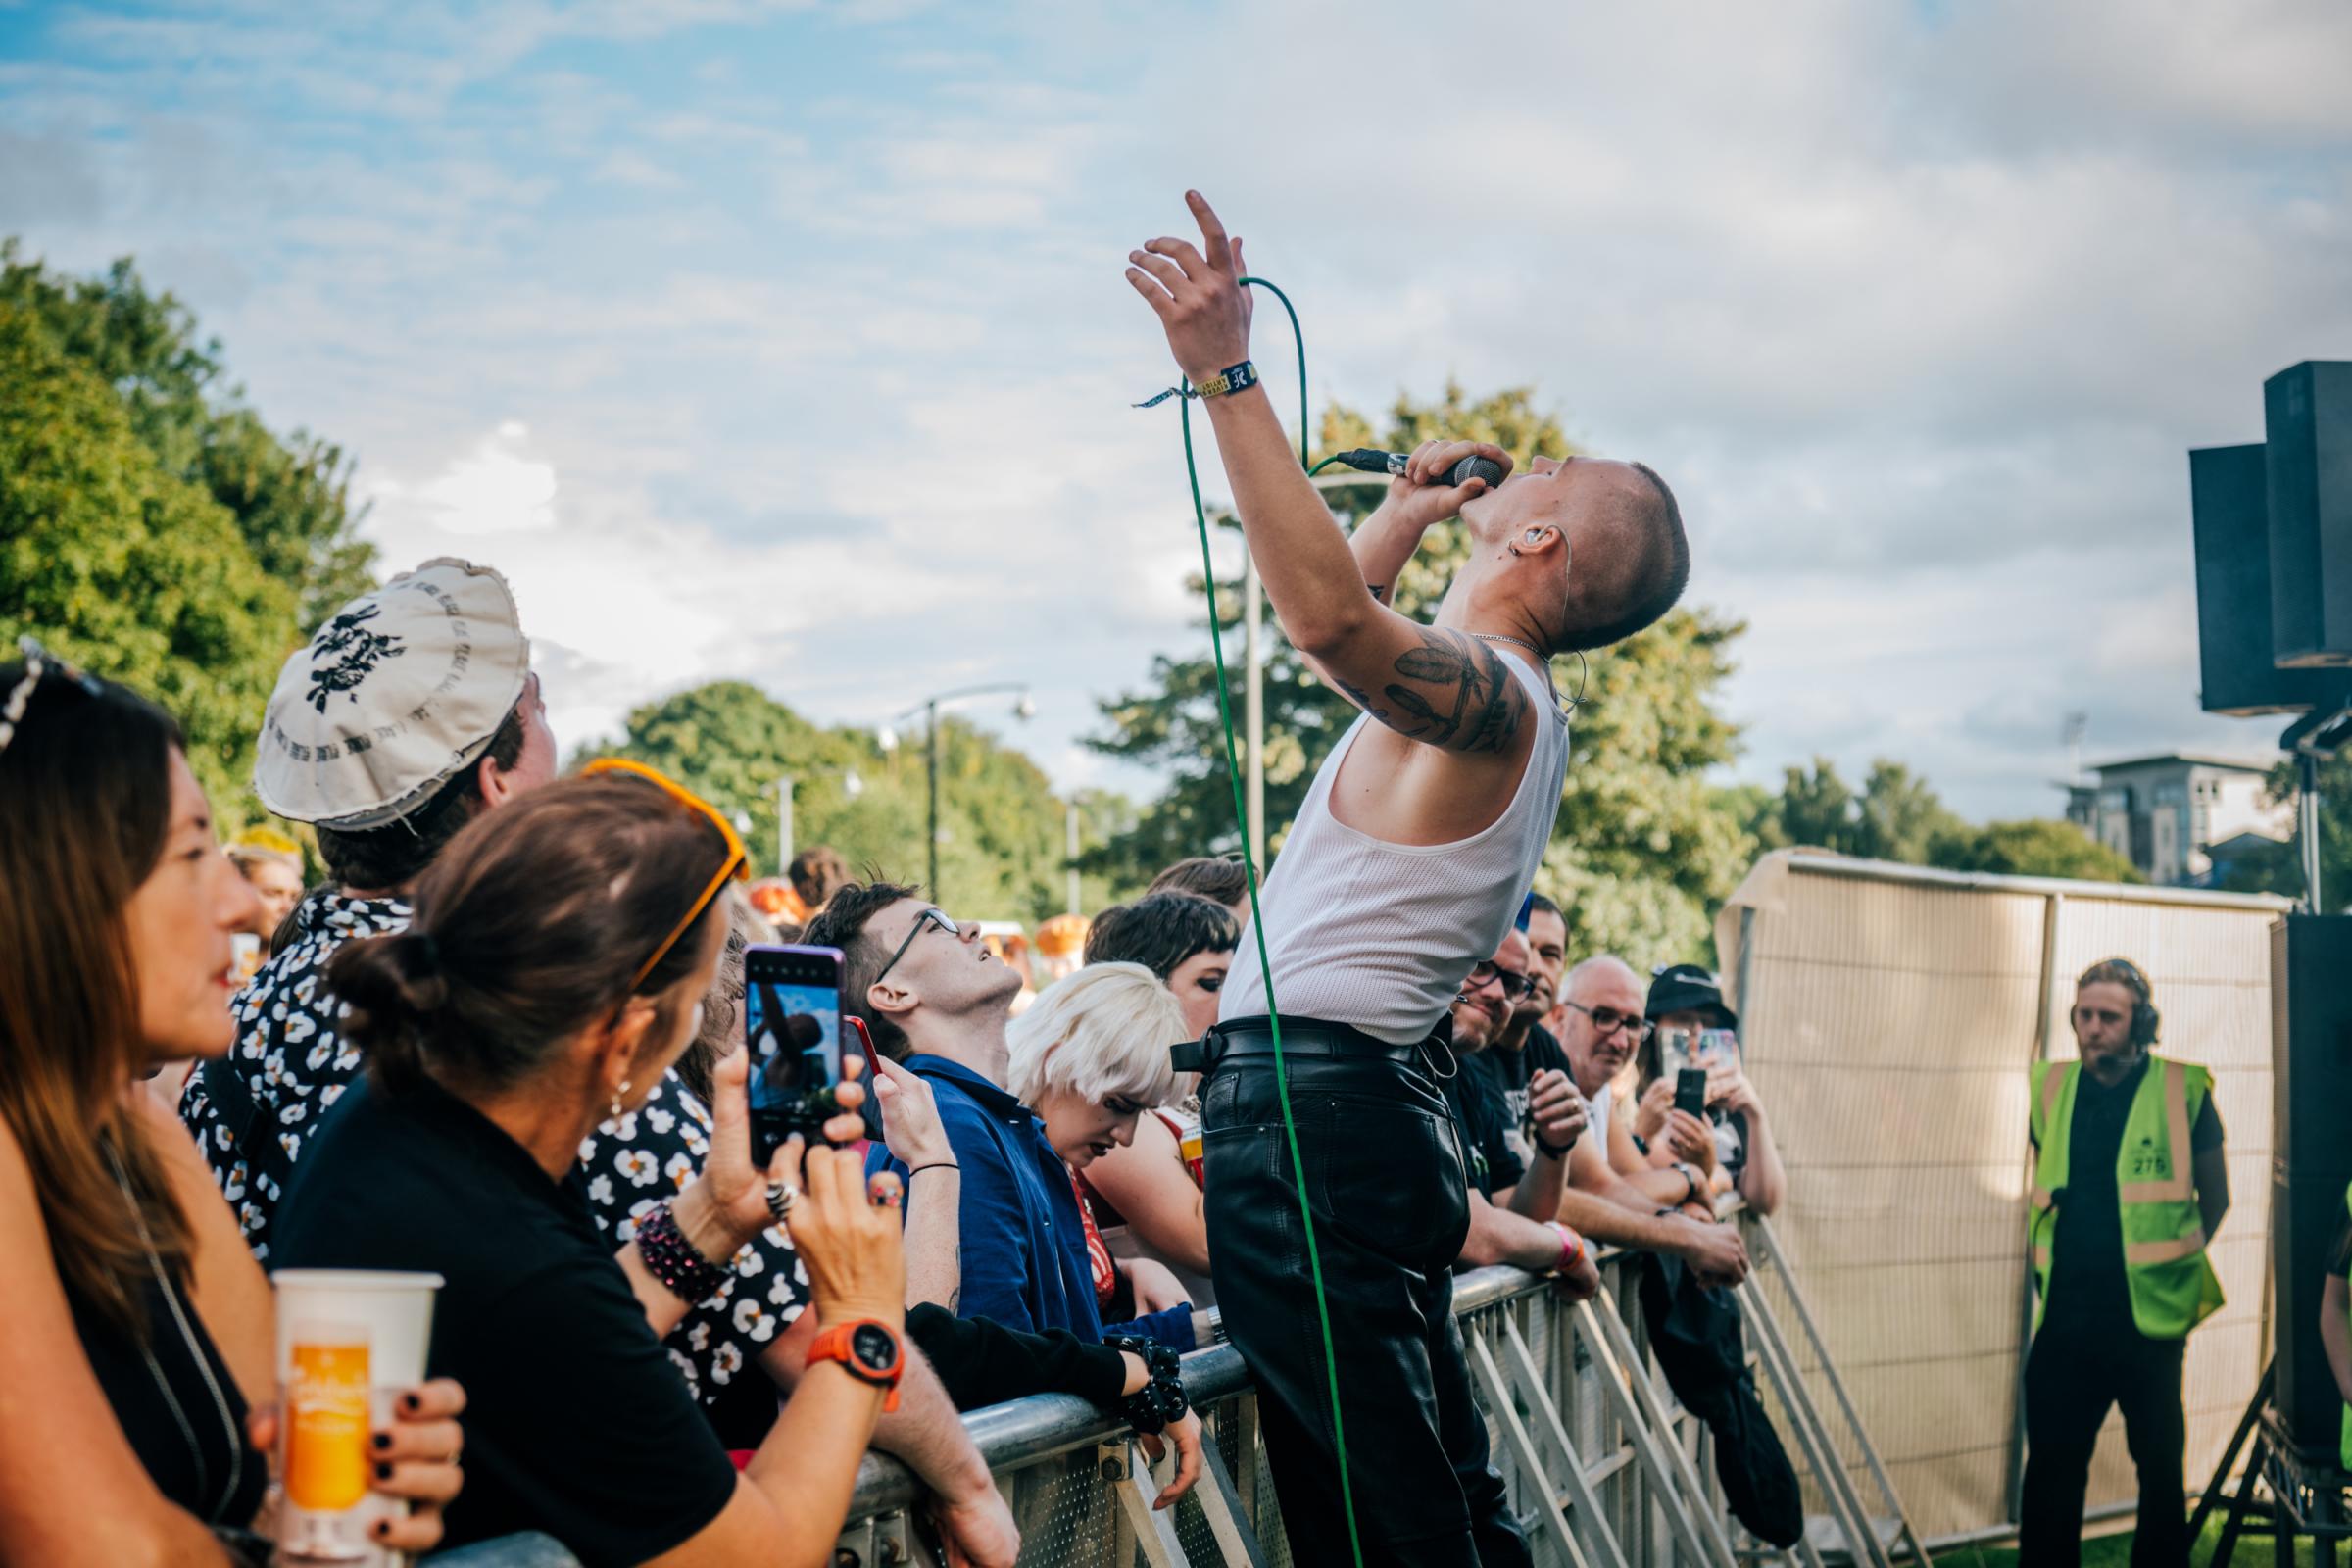 VLURE gave one of the performances of the weekend at TRNSMT. Picture by Gaelle Beri